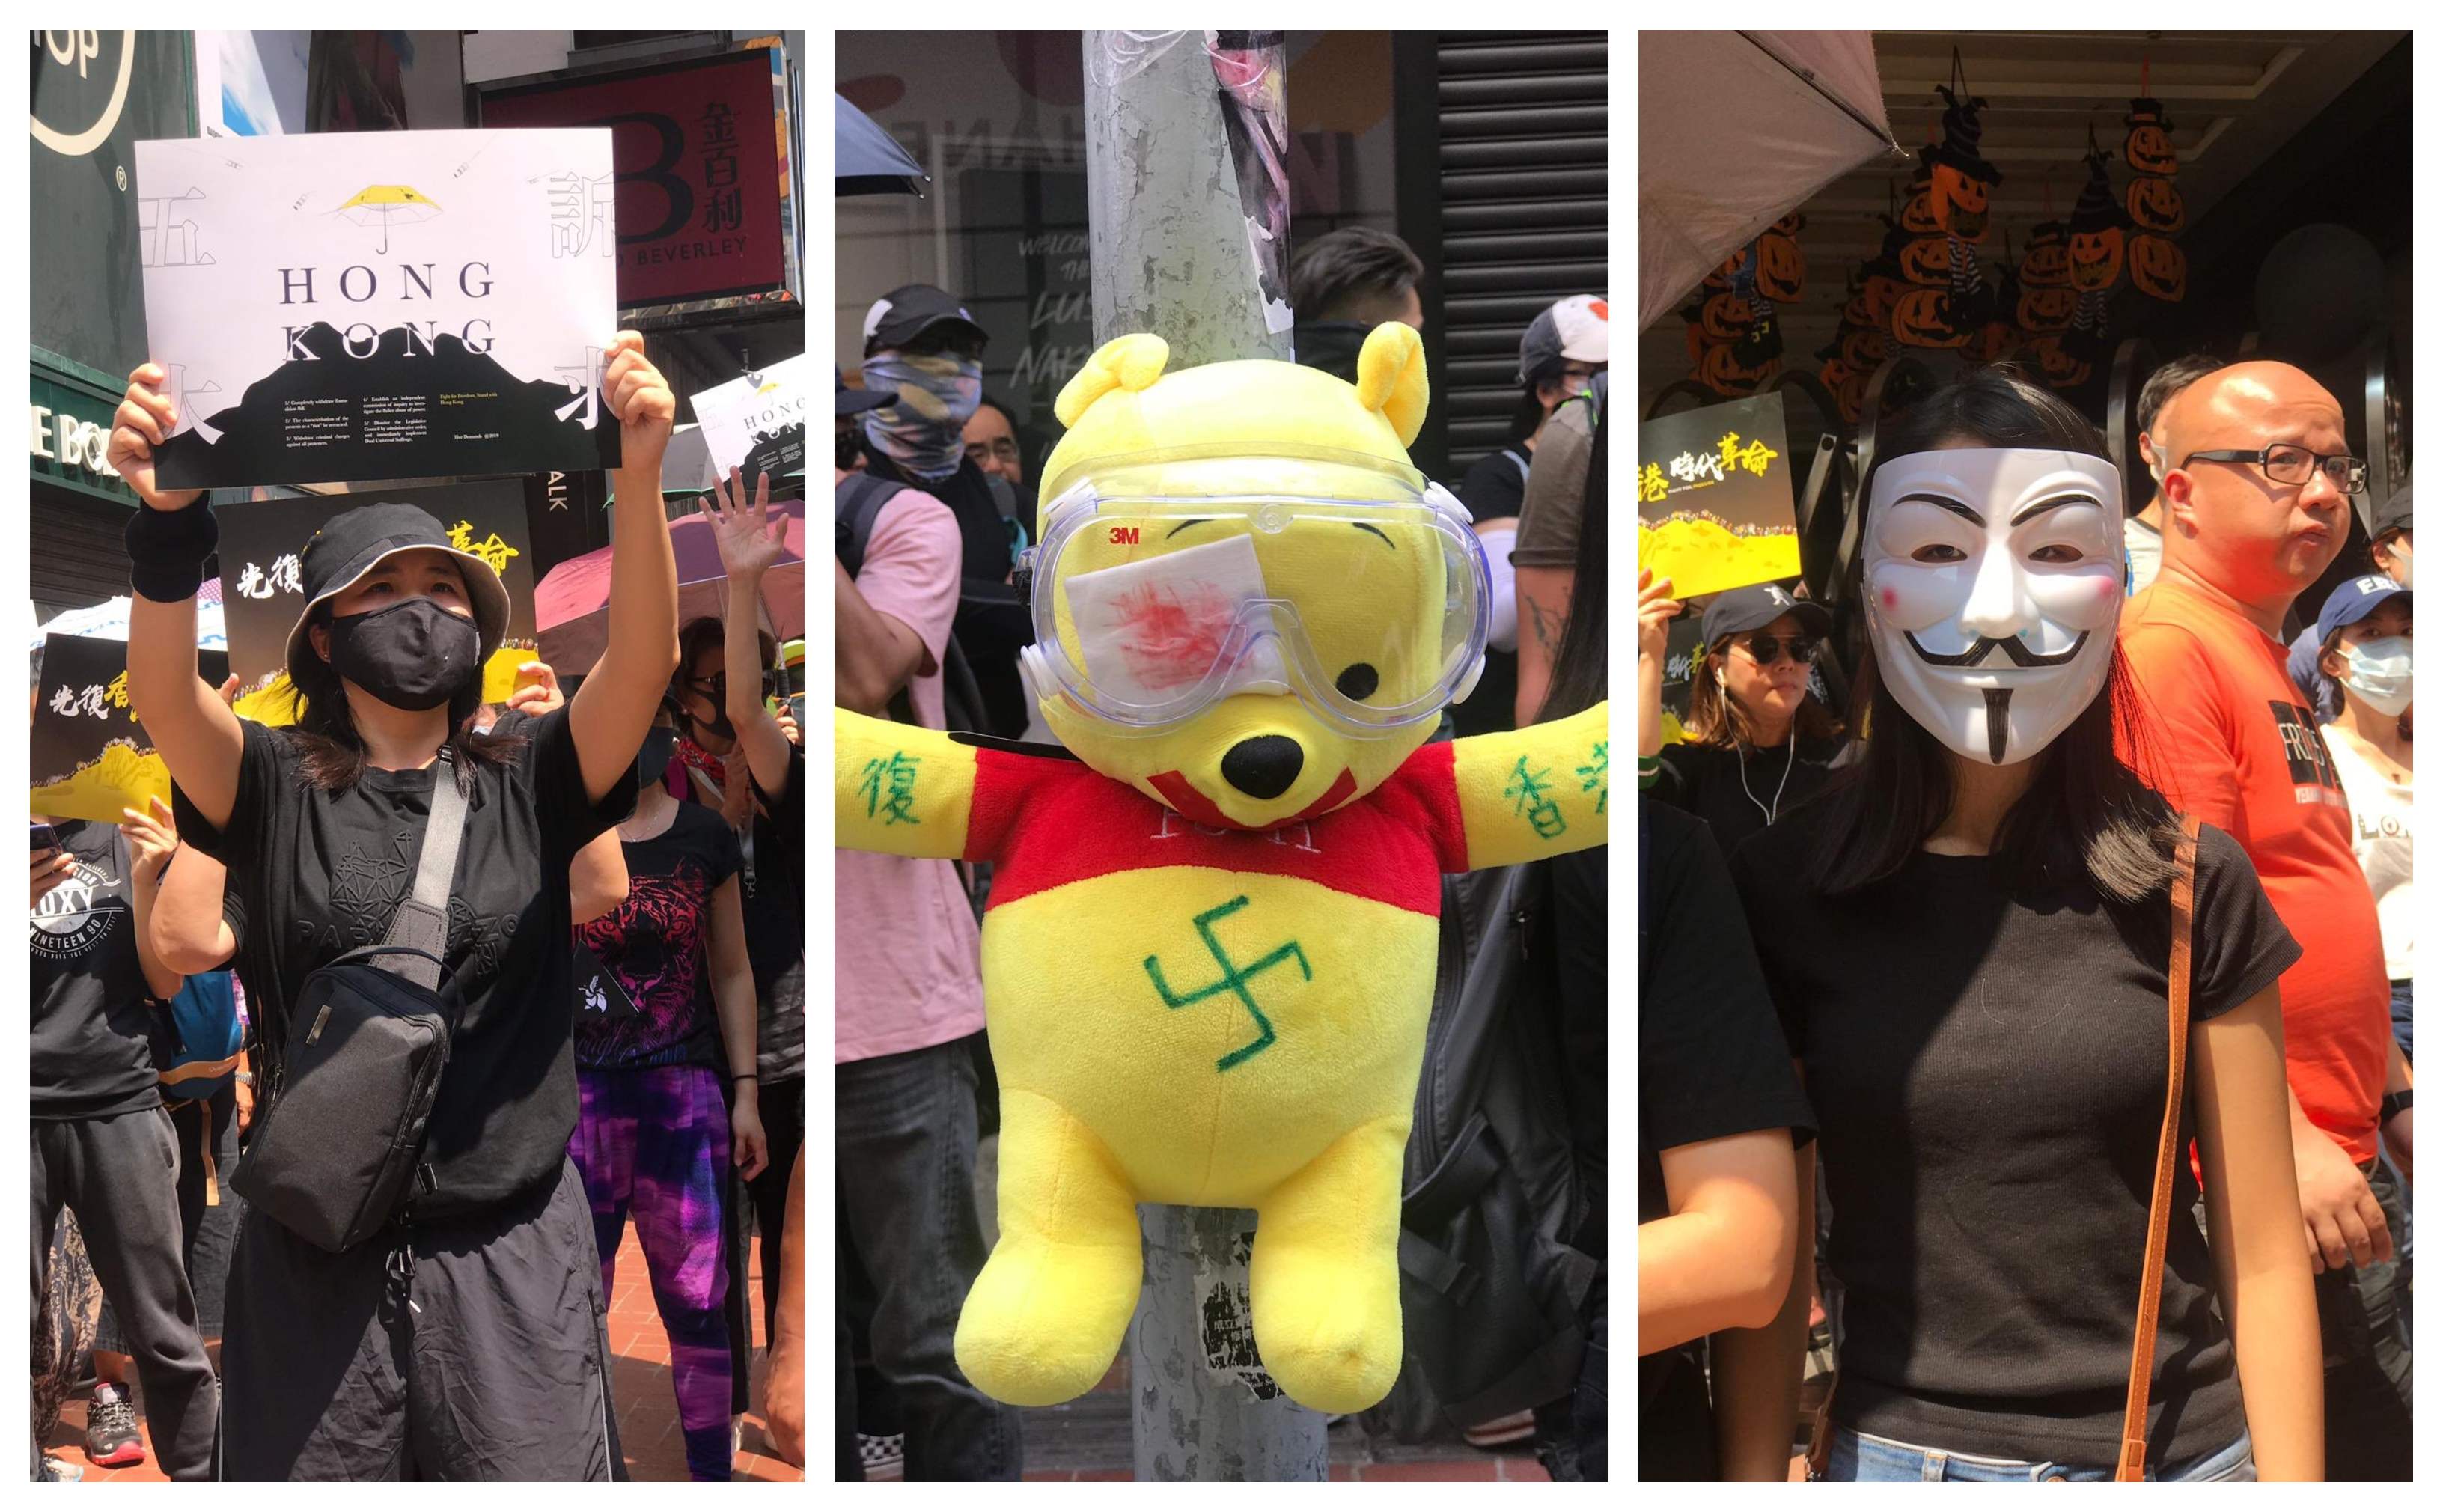 Lots of Guy Fawkes masks and a Nazi Winnie the Pooh (a stand in for Xi Jinping) were spotted as National Day protests kicked off this morning in Causeway Bay. Photos: Stuart White / Coconuts Media